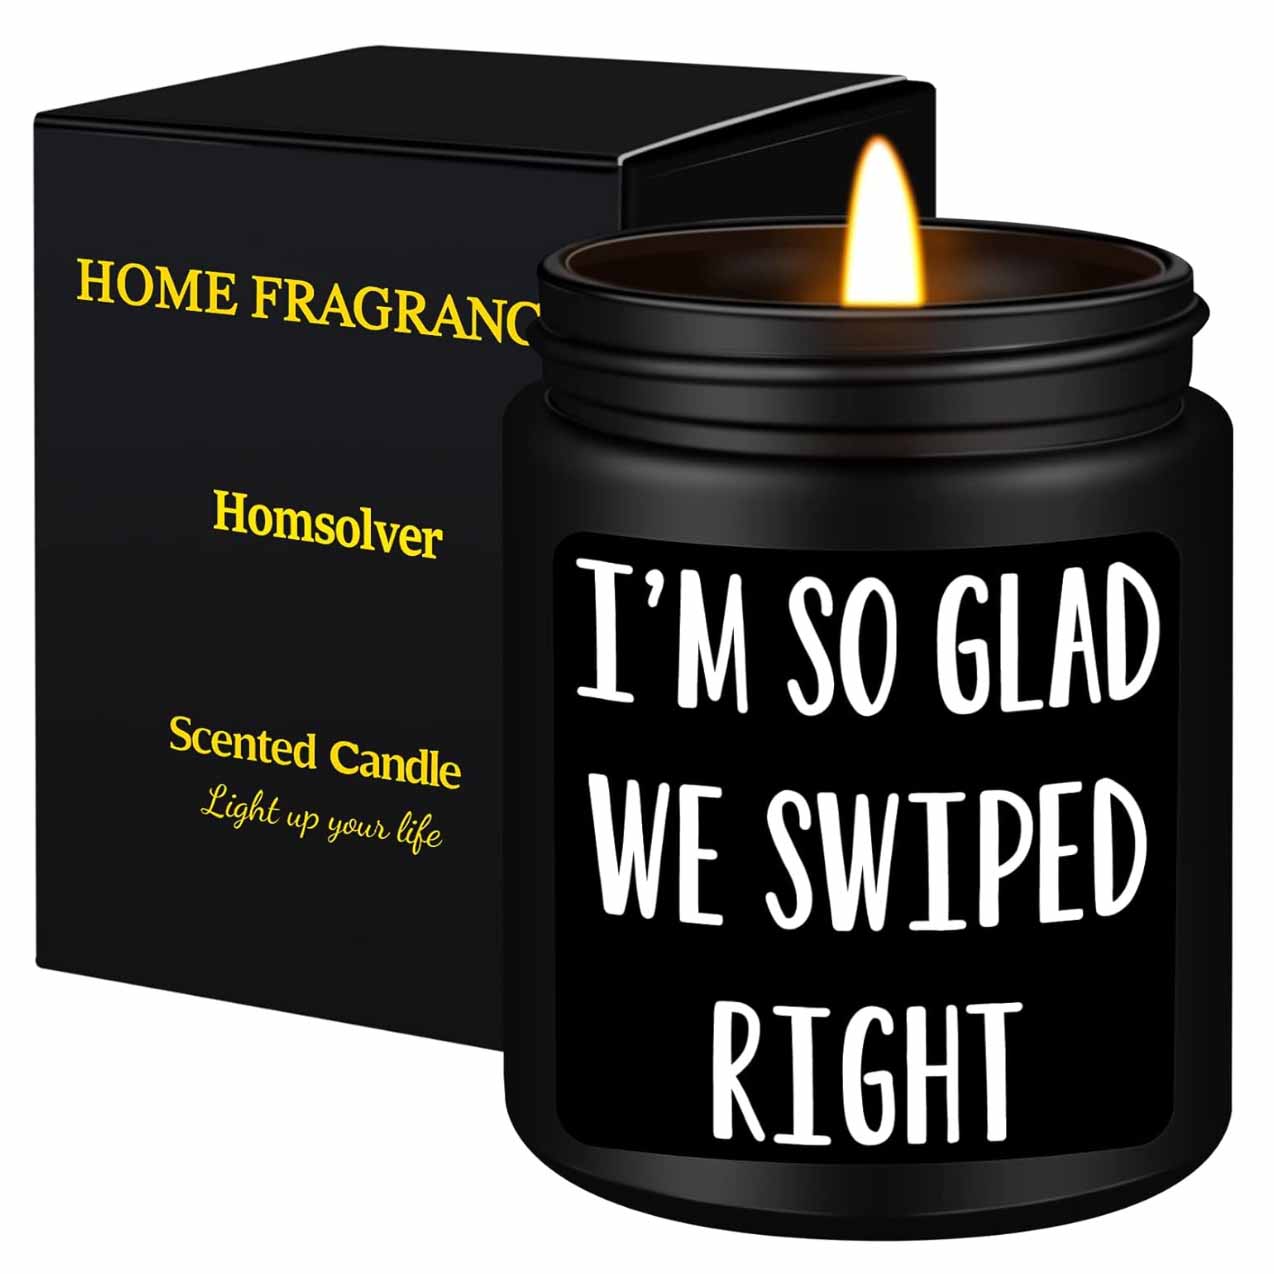 Black candle and gift box